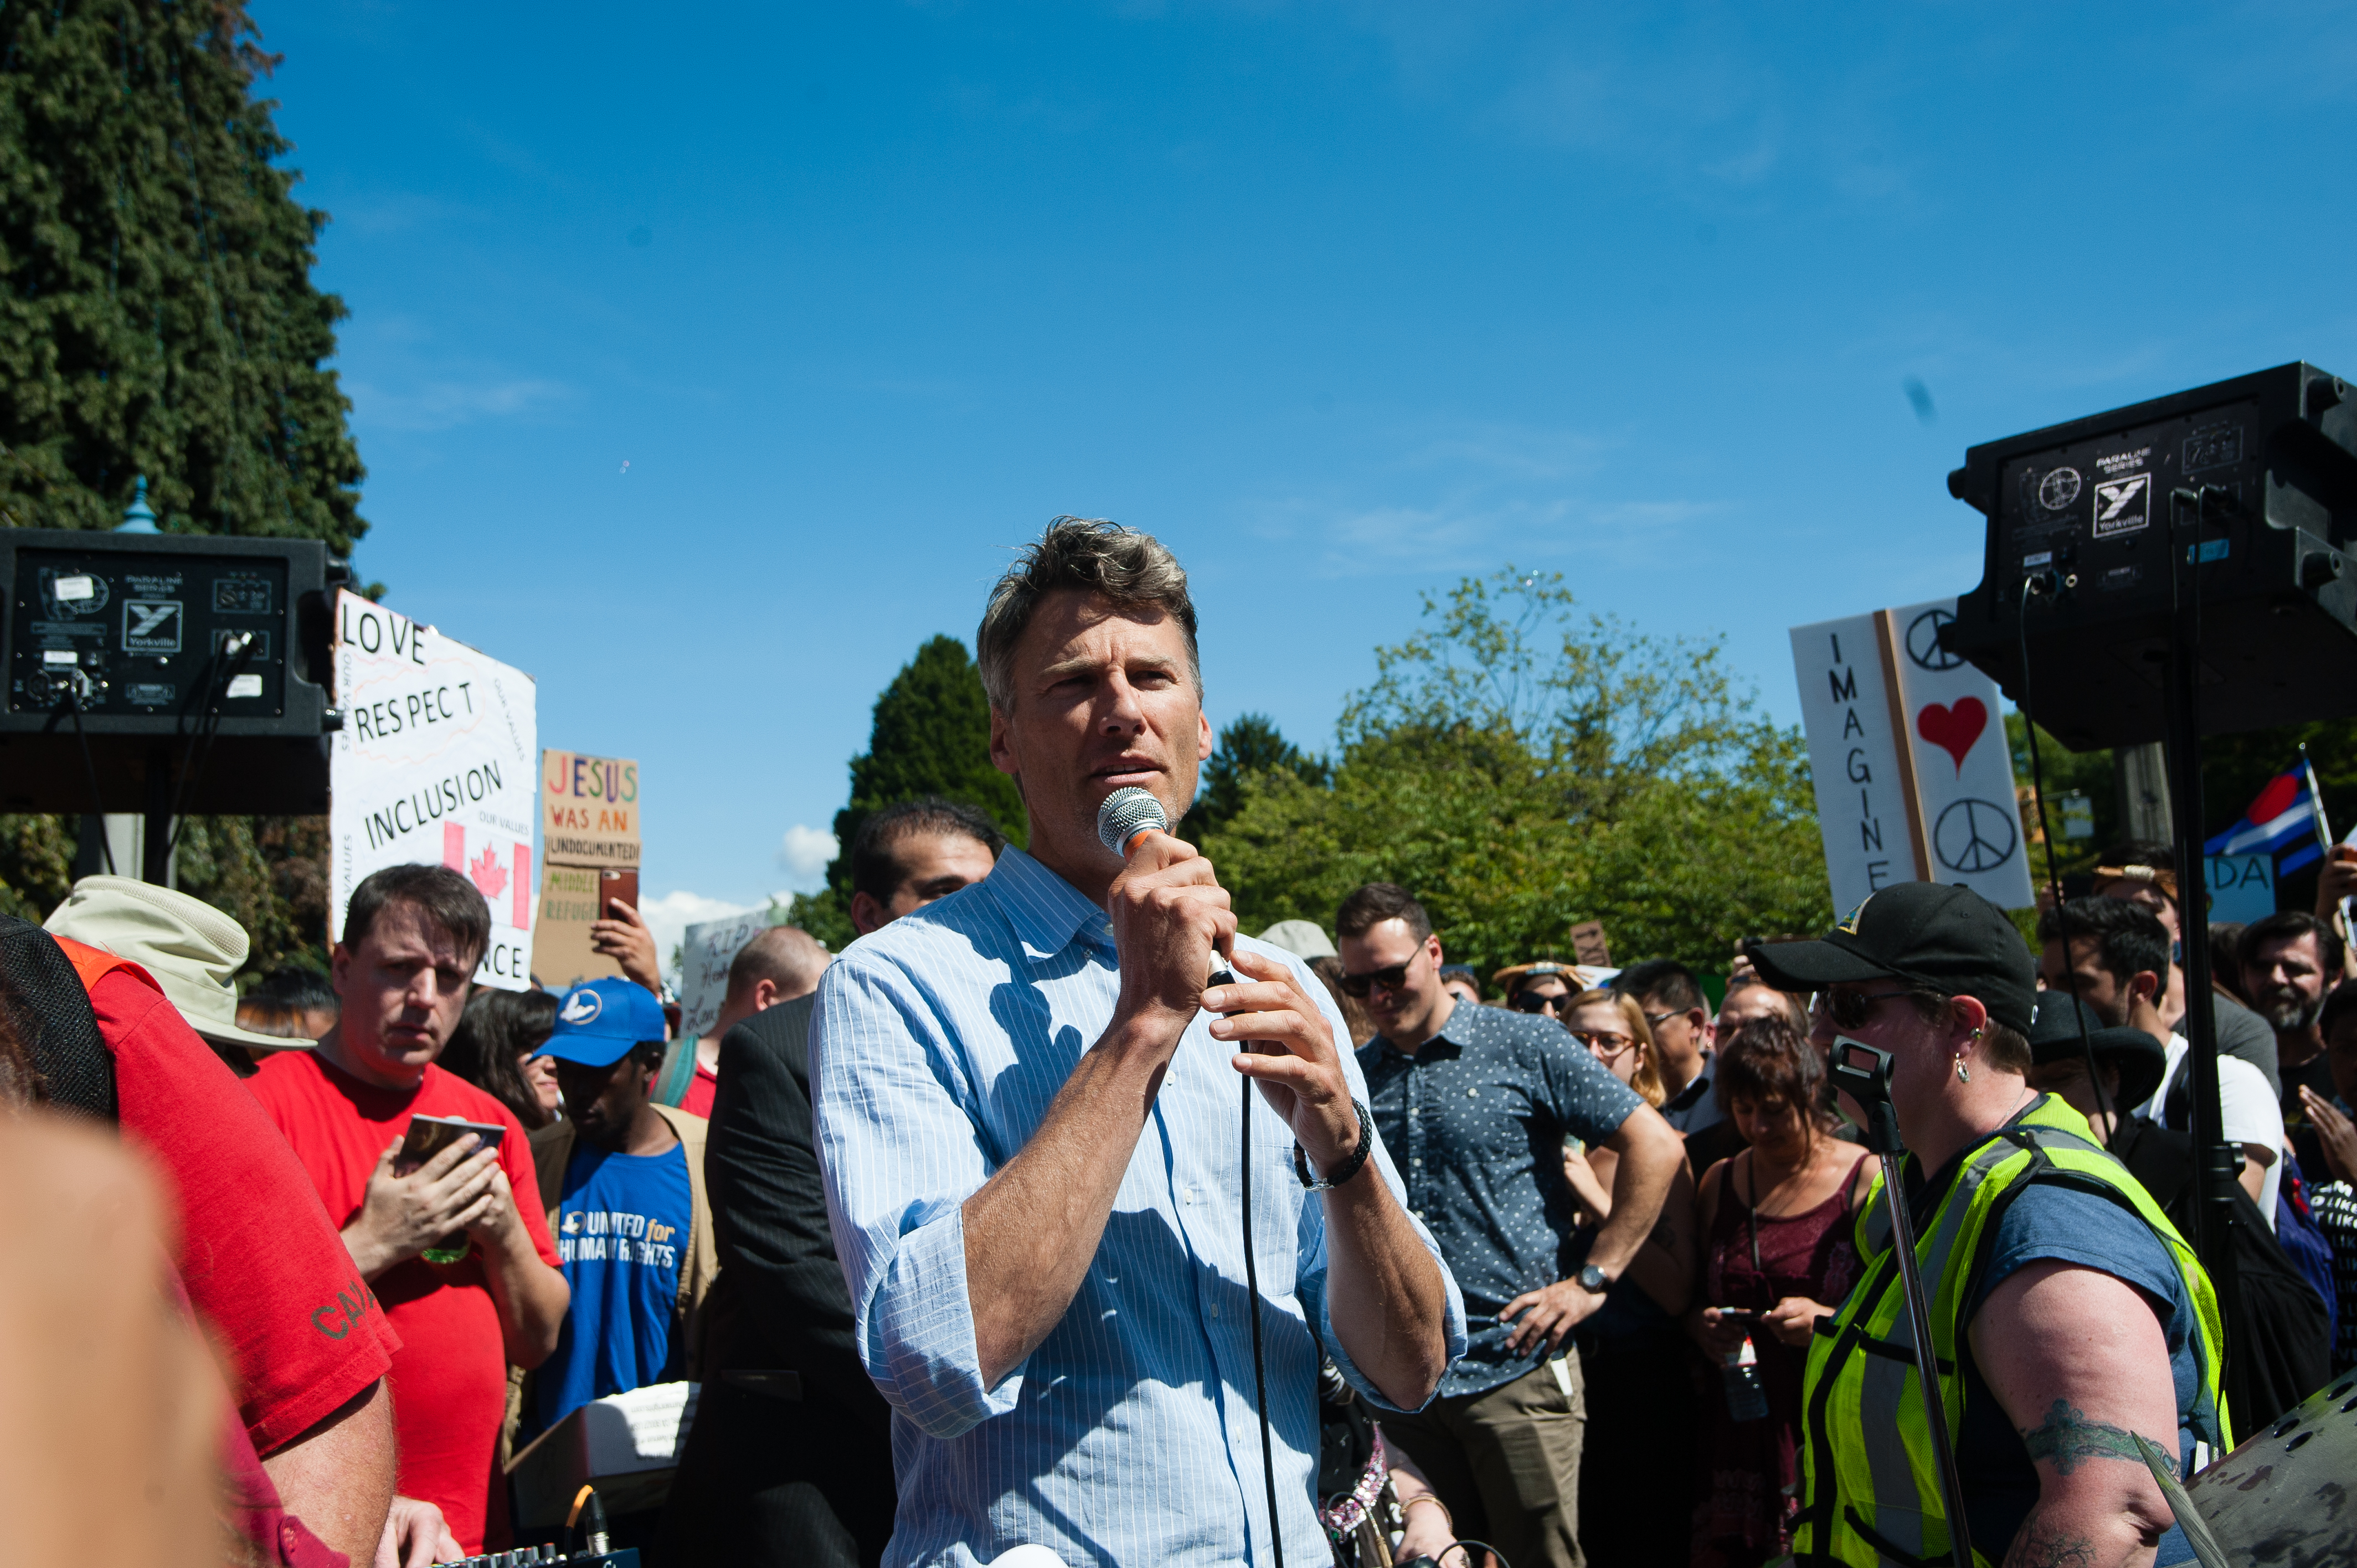 Mayor Gregor Robertson delivered his remarks at the protest.